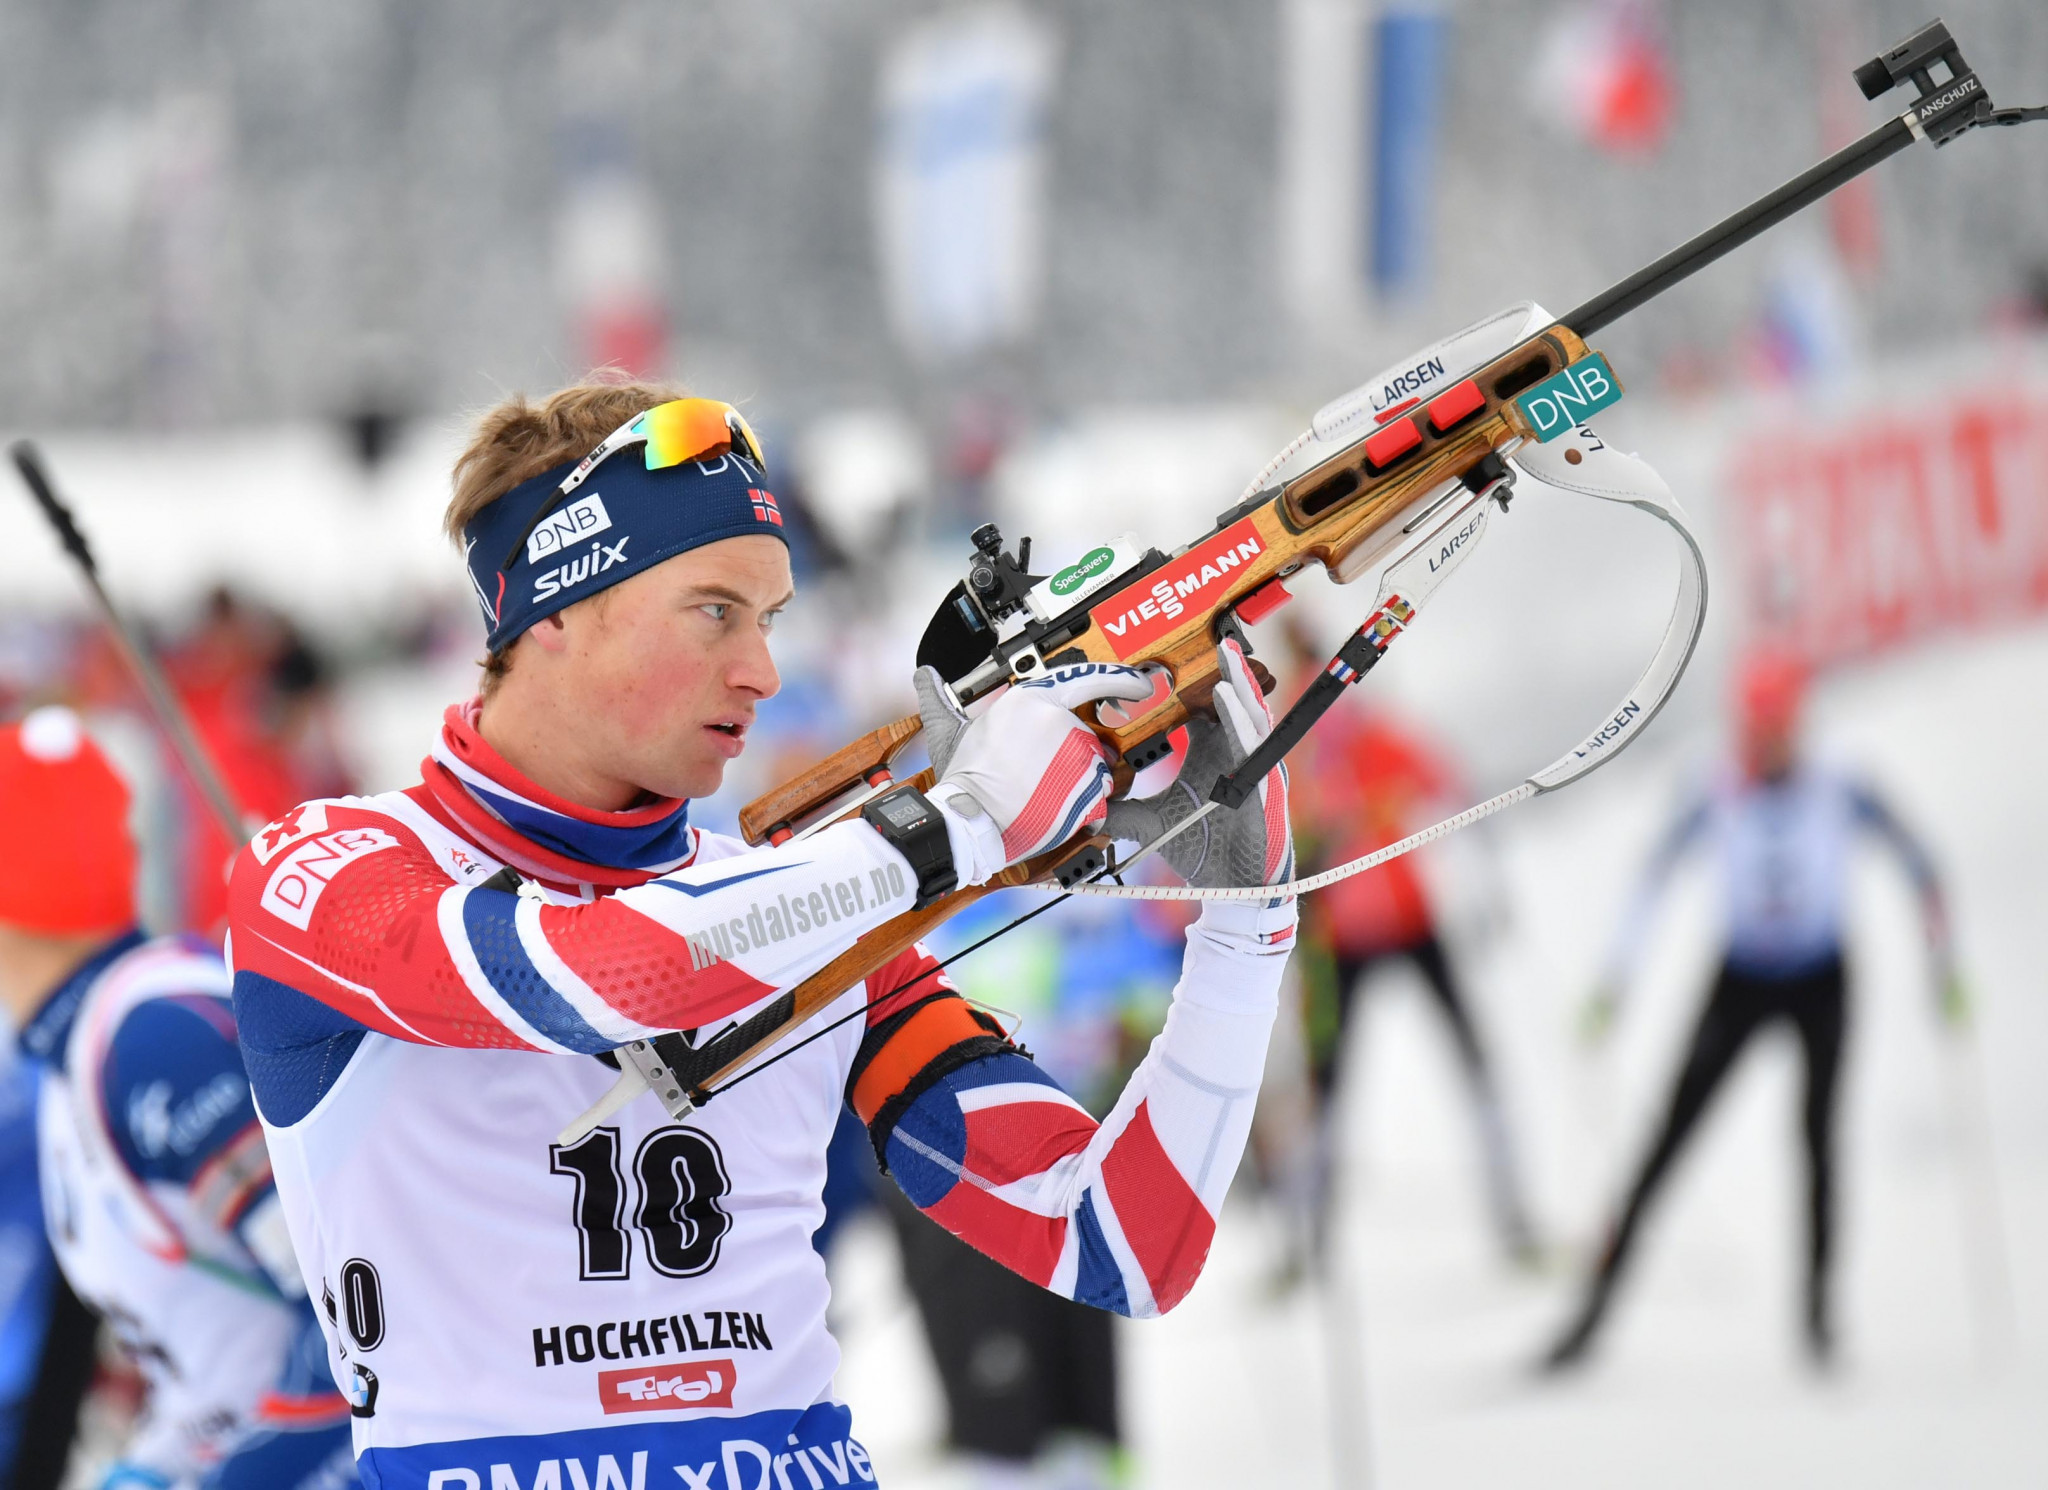 Henrik L’Abee Lund of Norway claimed his first World Cup win in the men's 10km sprint ©Getty Images